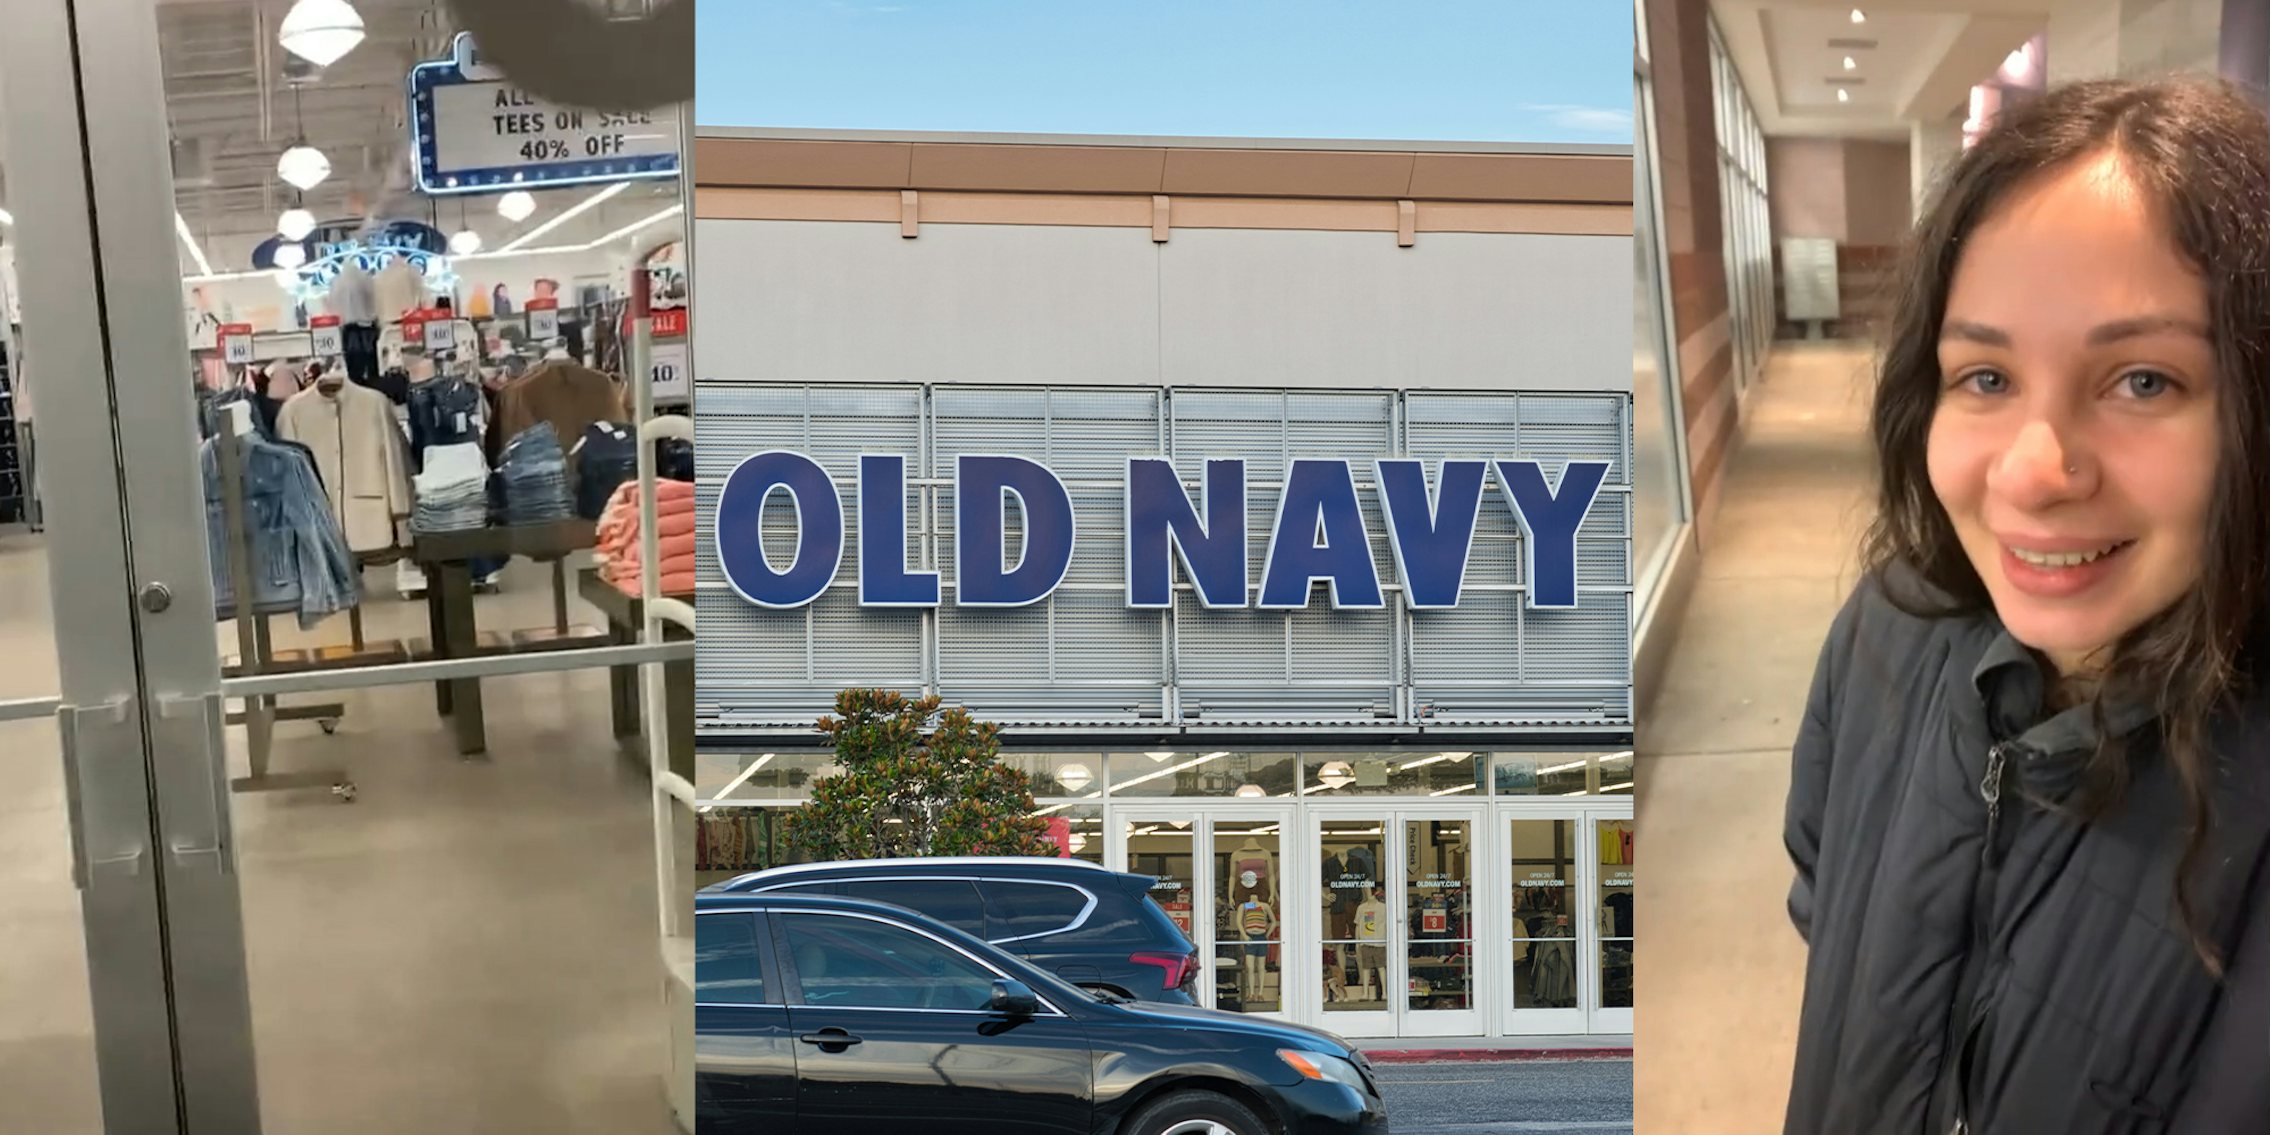 Old Navy advertises it’s open 24/7. Customers can’t get in